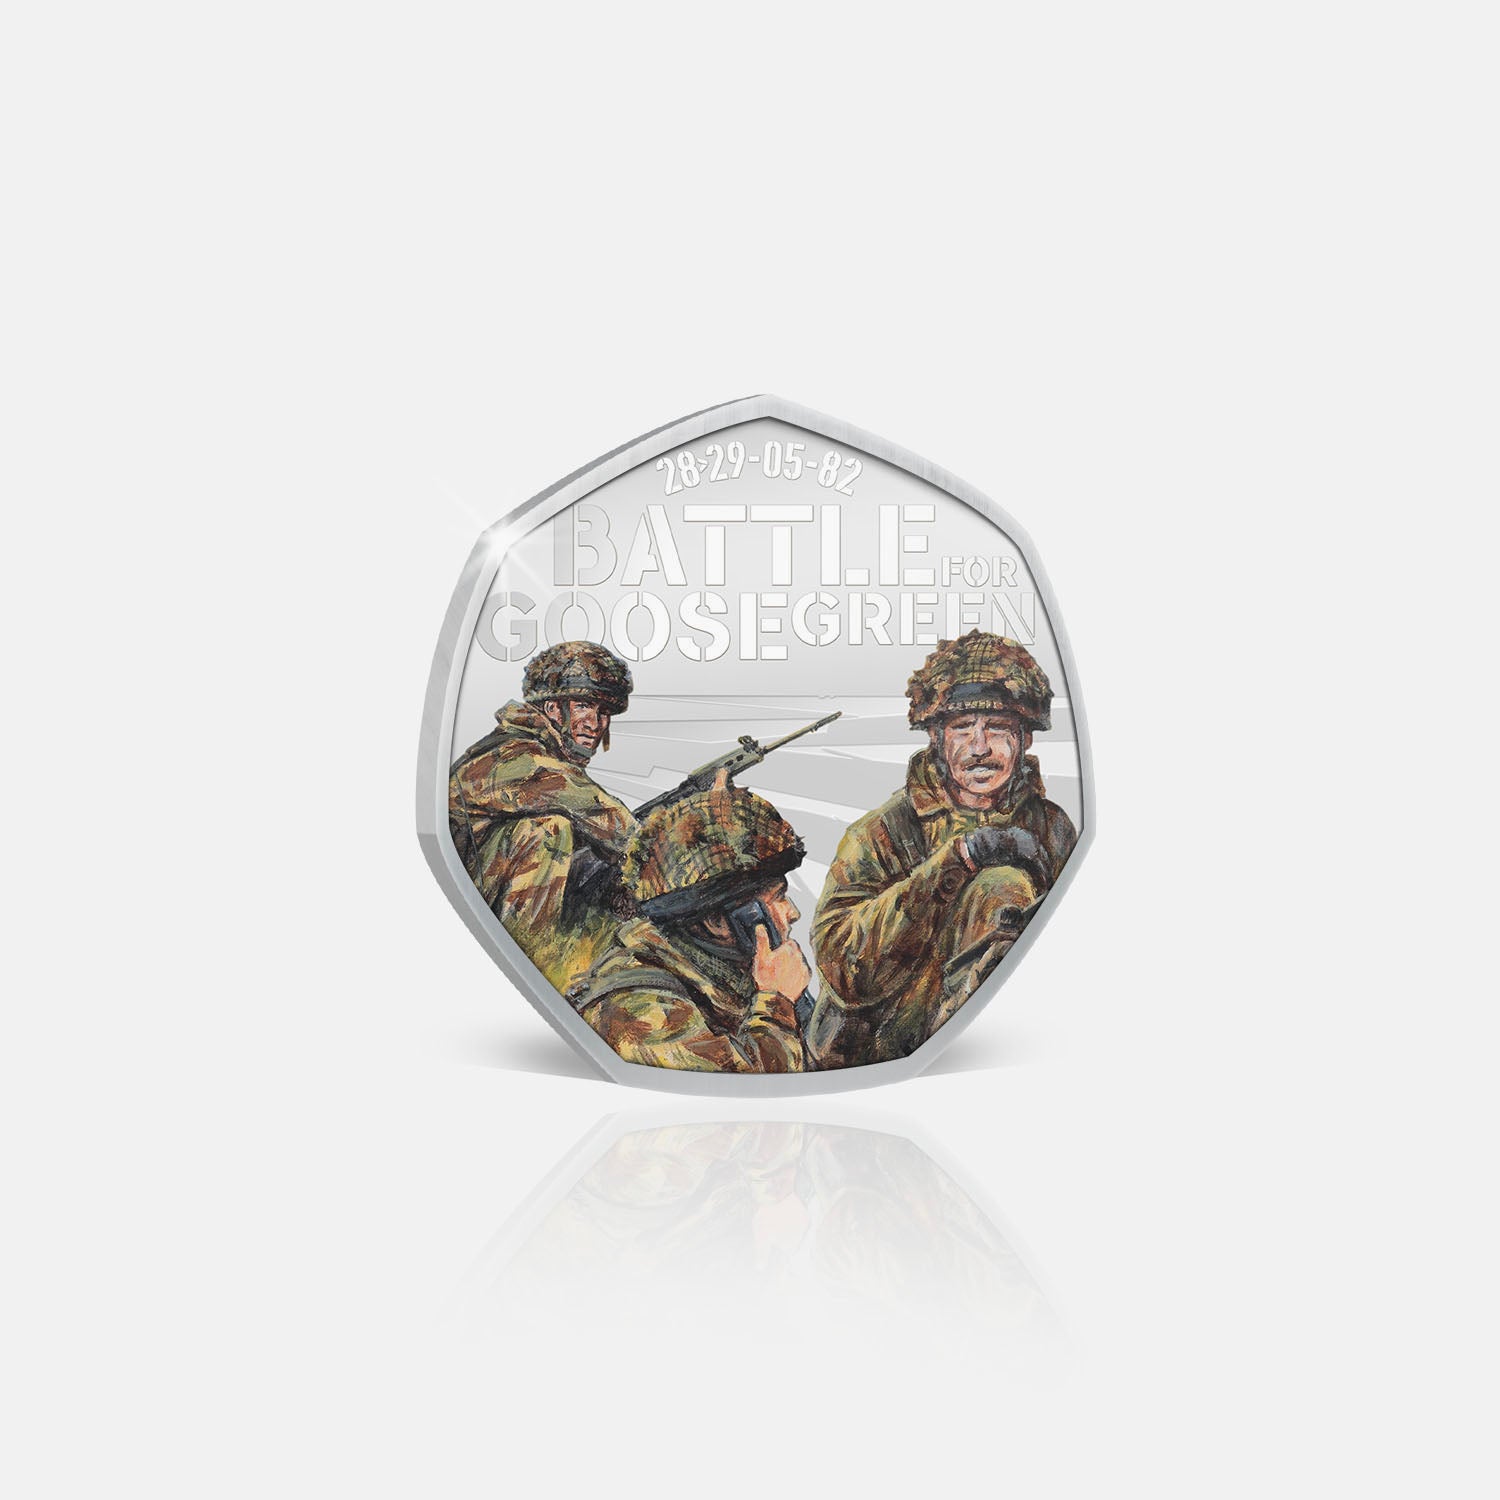 Goose Green in Coin Holder